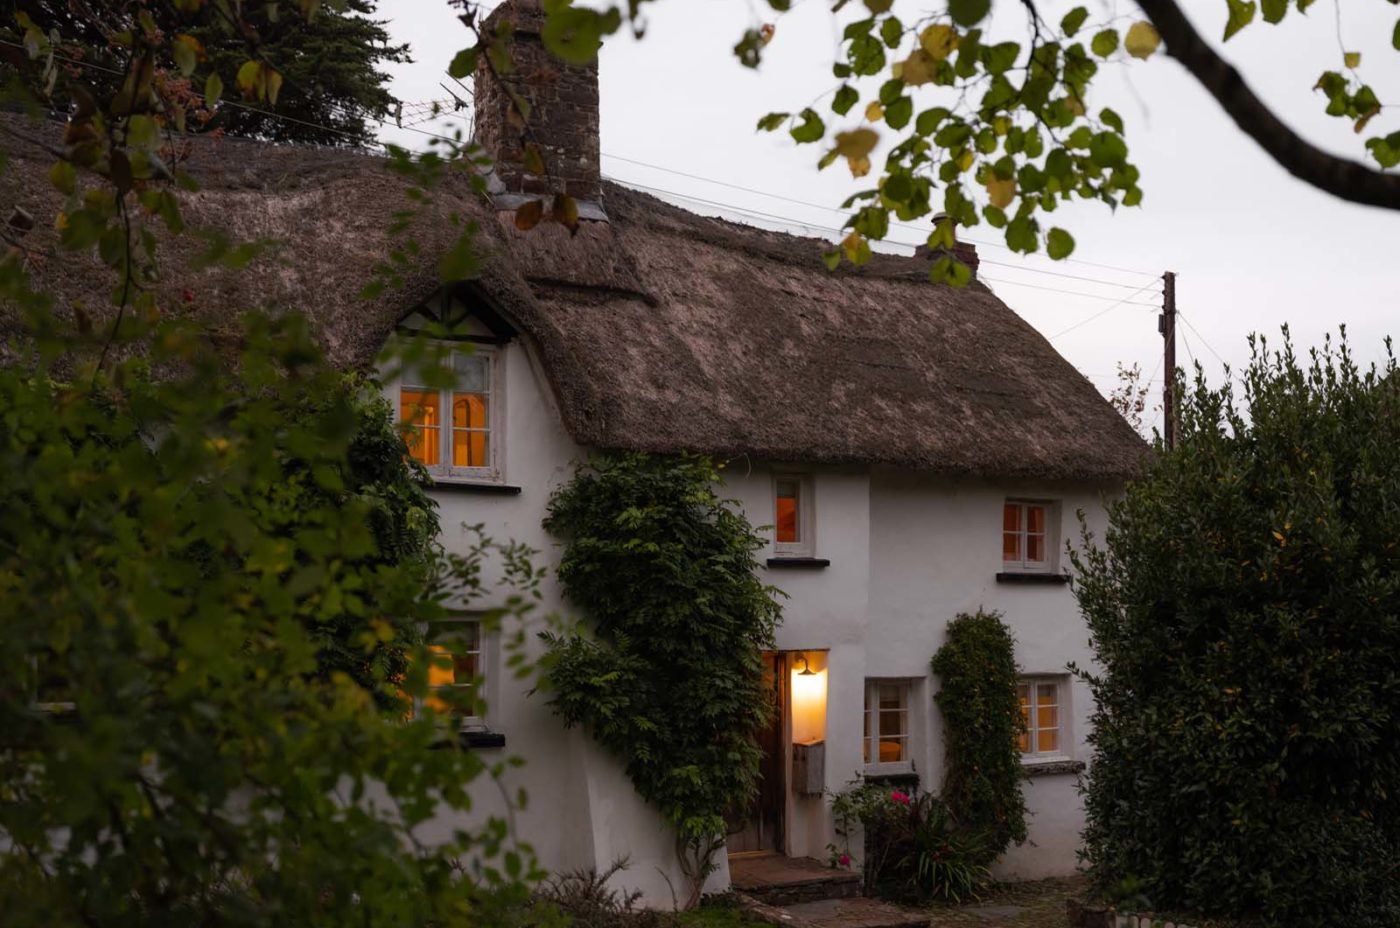 A cosy thatched cottage at dusk with lights on inside